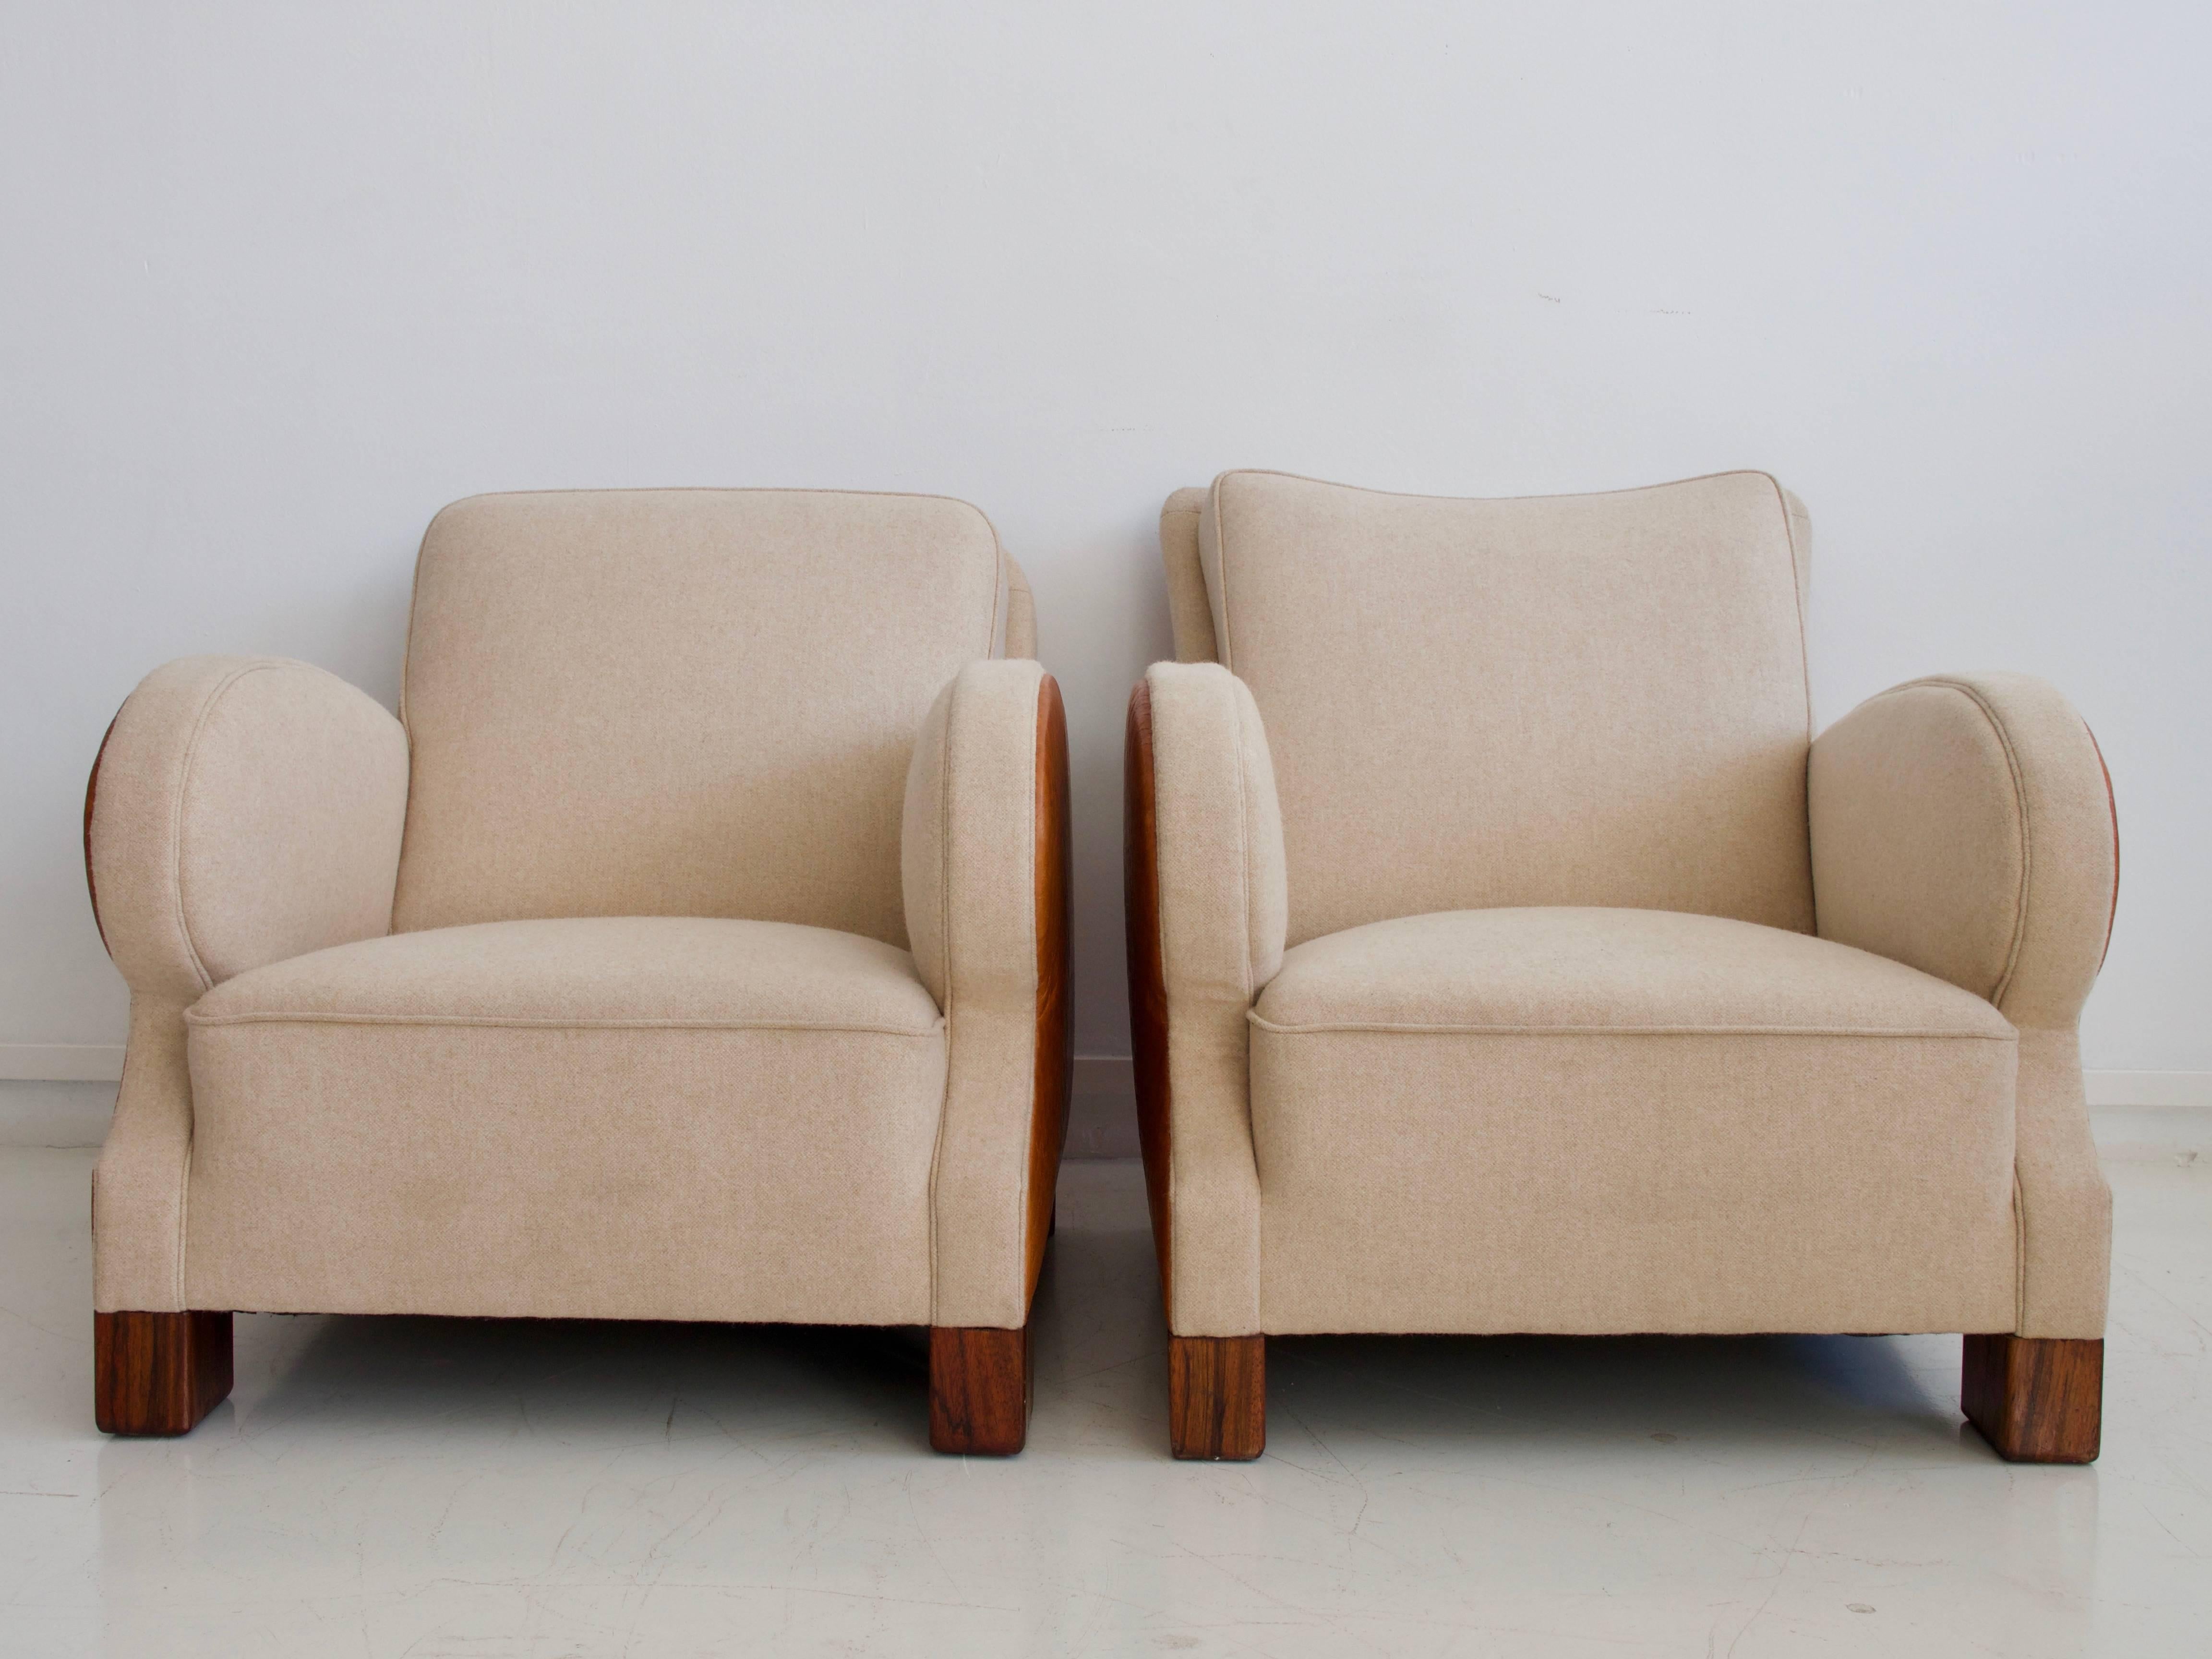 Two Art Deco style armchairs from circa 1930s with intentionally slightly different backrests. These elegant lounge chairs are reupholstered in beige wool and cognac colored leather, legs in stained wood.